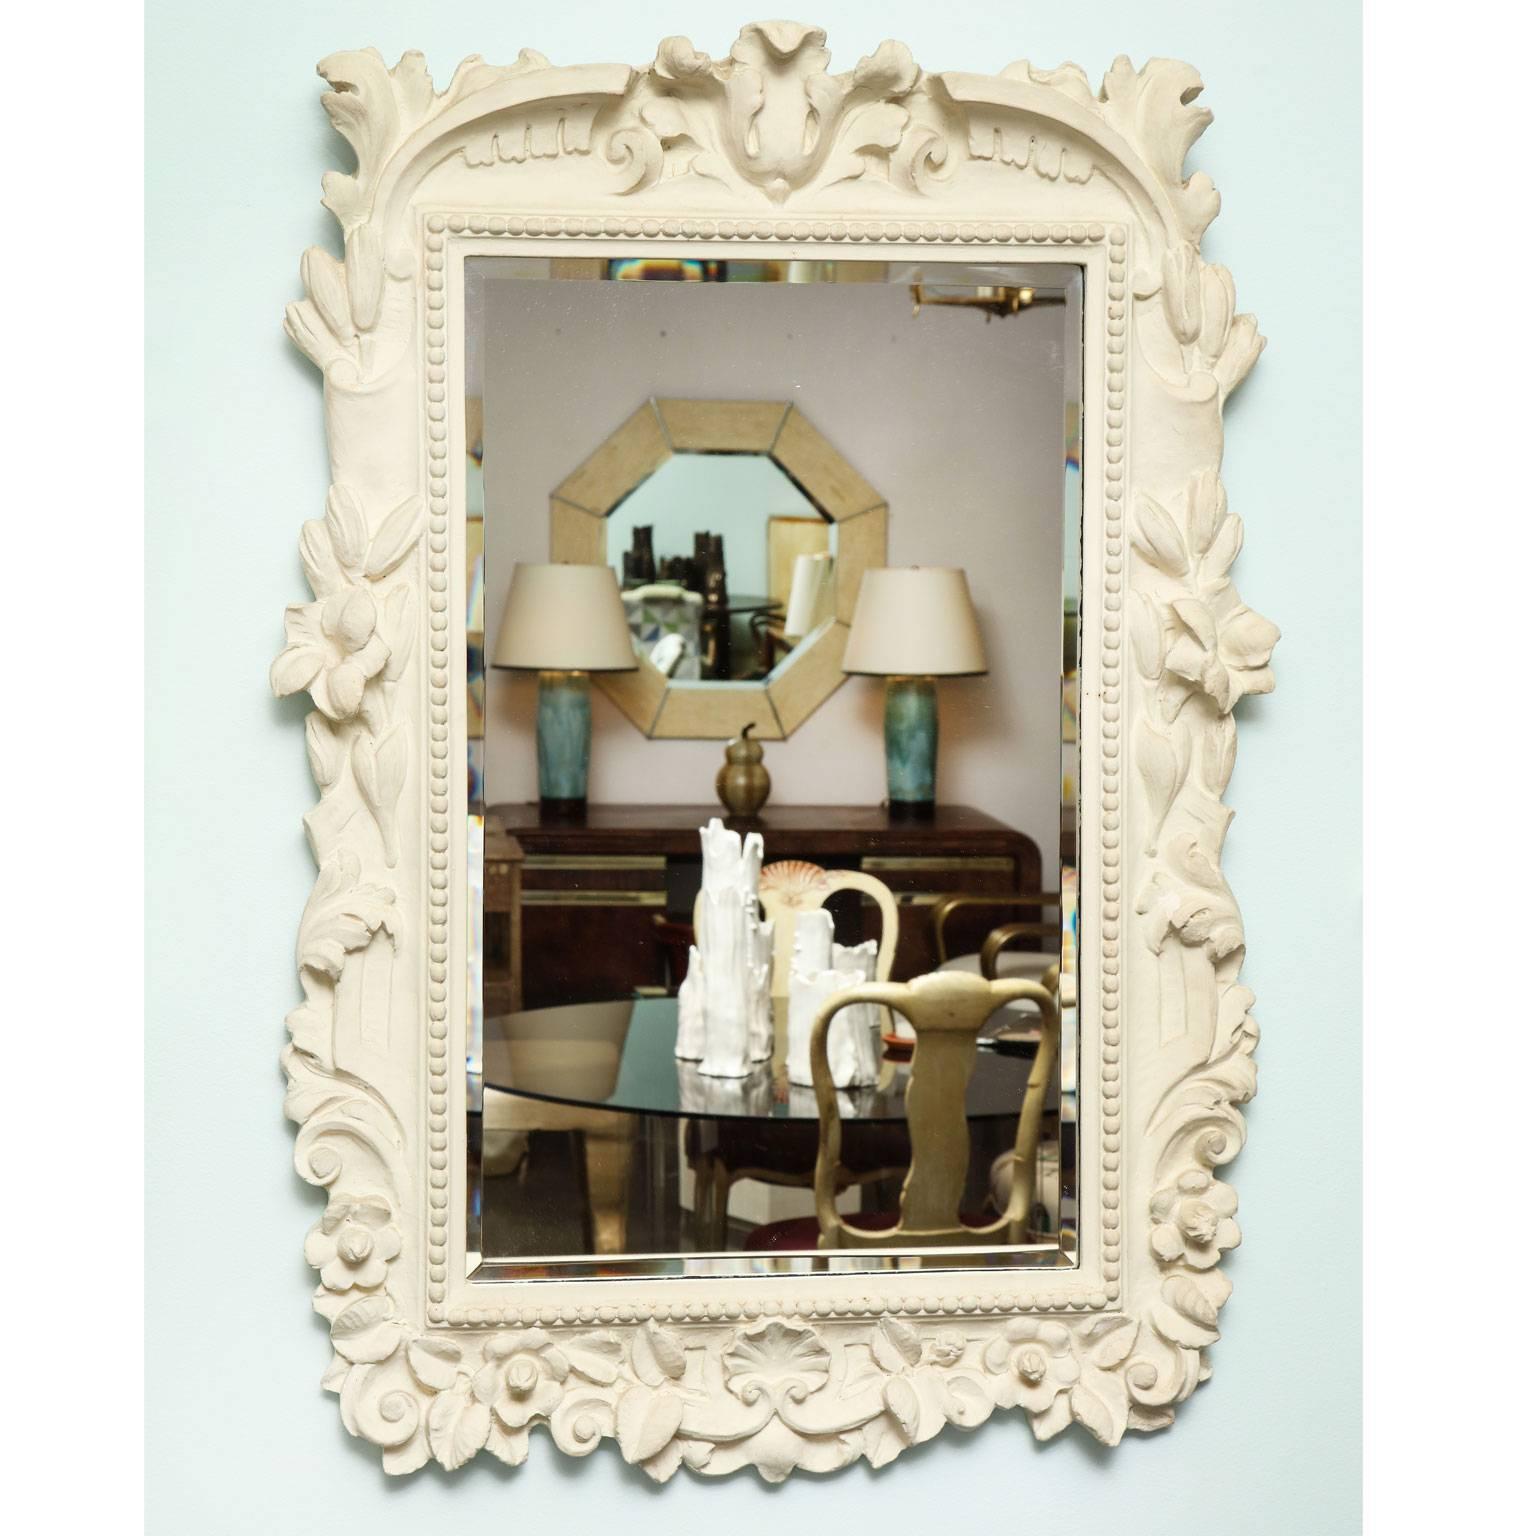 Frances Elkins (1888-1953)
Plaster mirror in cream painted finish with flowers and
shell motifs and beaded trim. Together with a pair of cast plaster dolphins.
American, circa 1940  

Provenance: 
Estate of Frances Elkins’ daughter Katherine